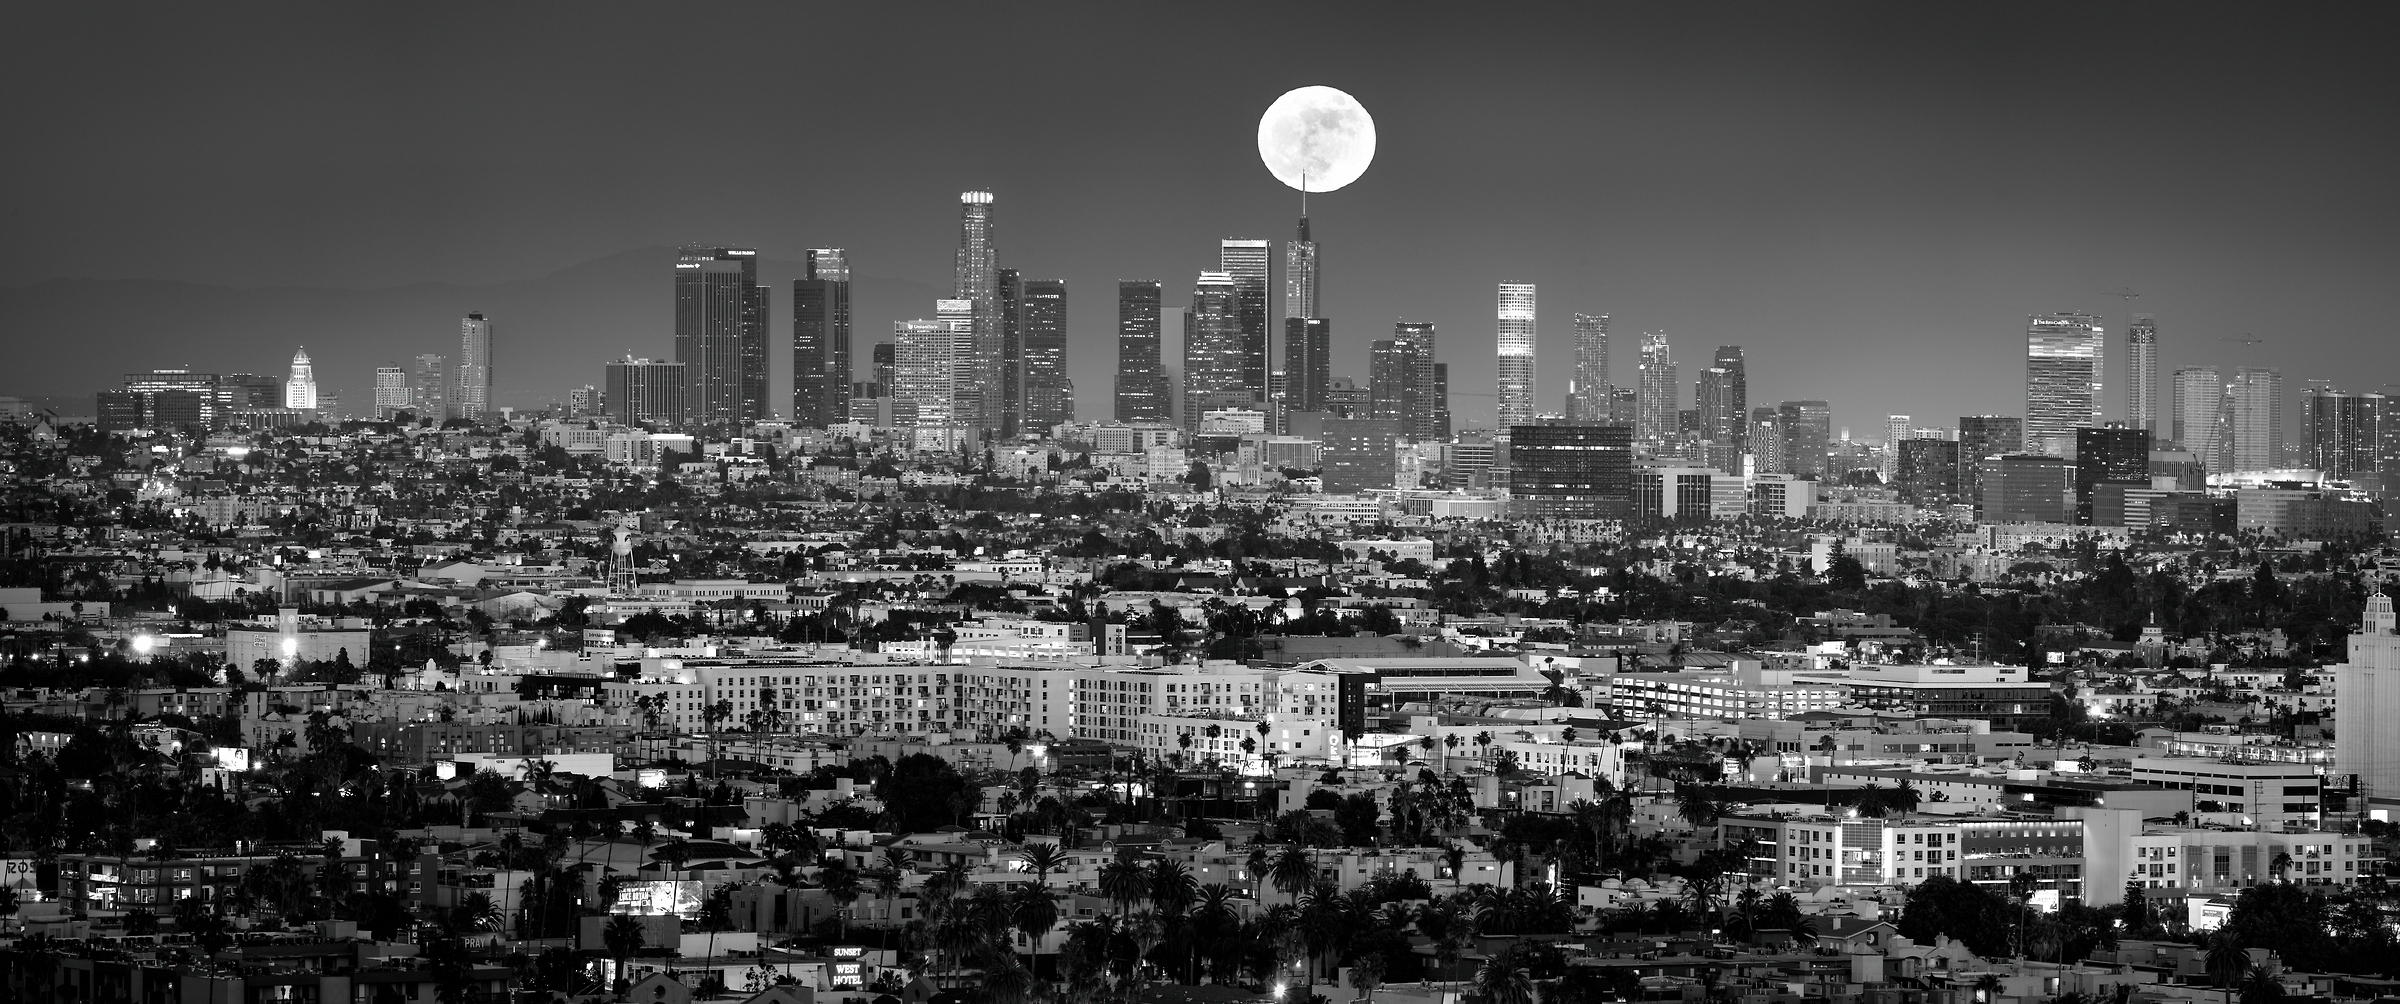 259 megapixels! A very high resolution, large-format VAST photo print of the Los Angles skyline at night with the moon; cityscape photograph created by Jeff Lewis in Hollywood Hills, Los Angeles, California